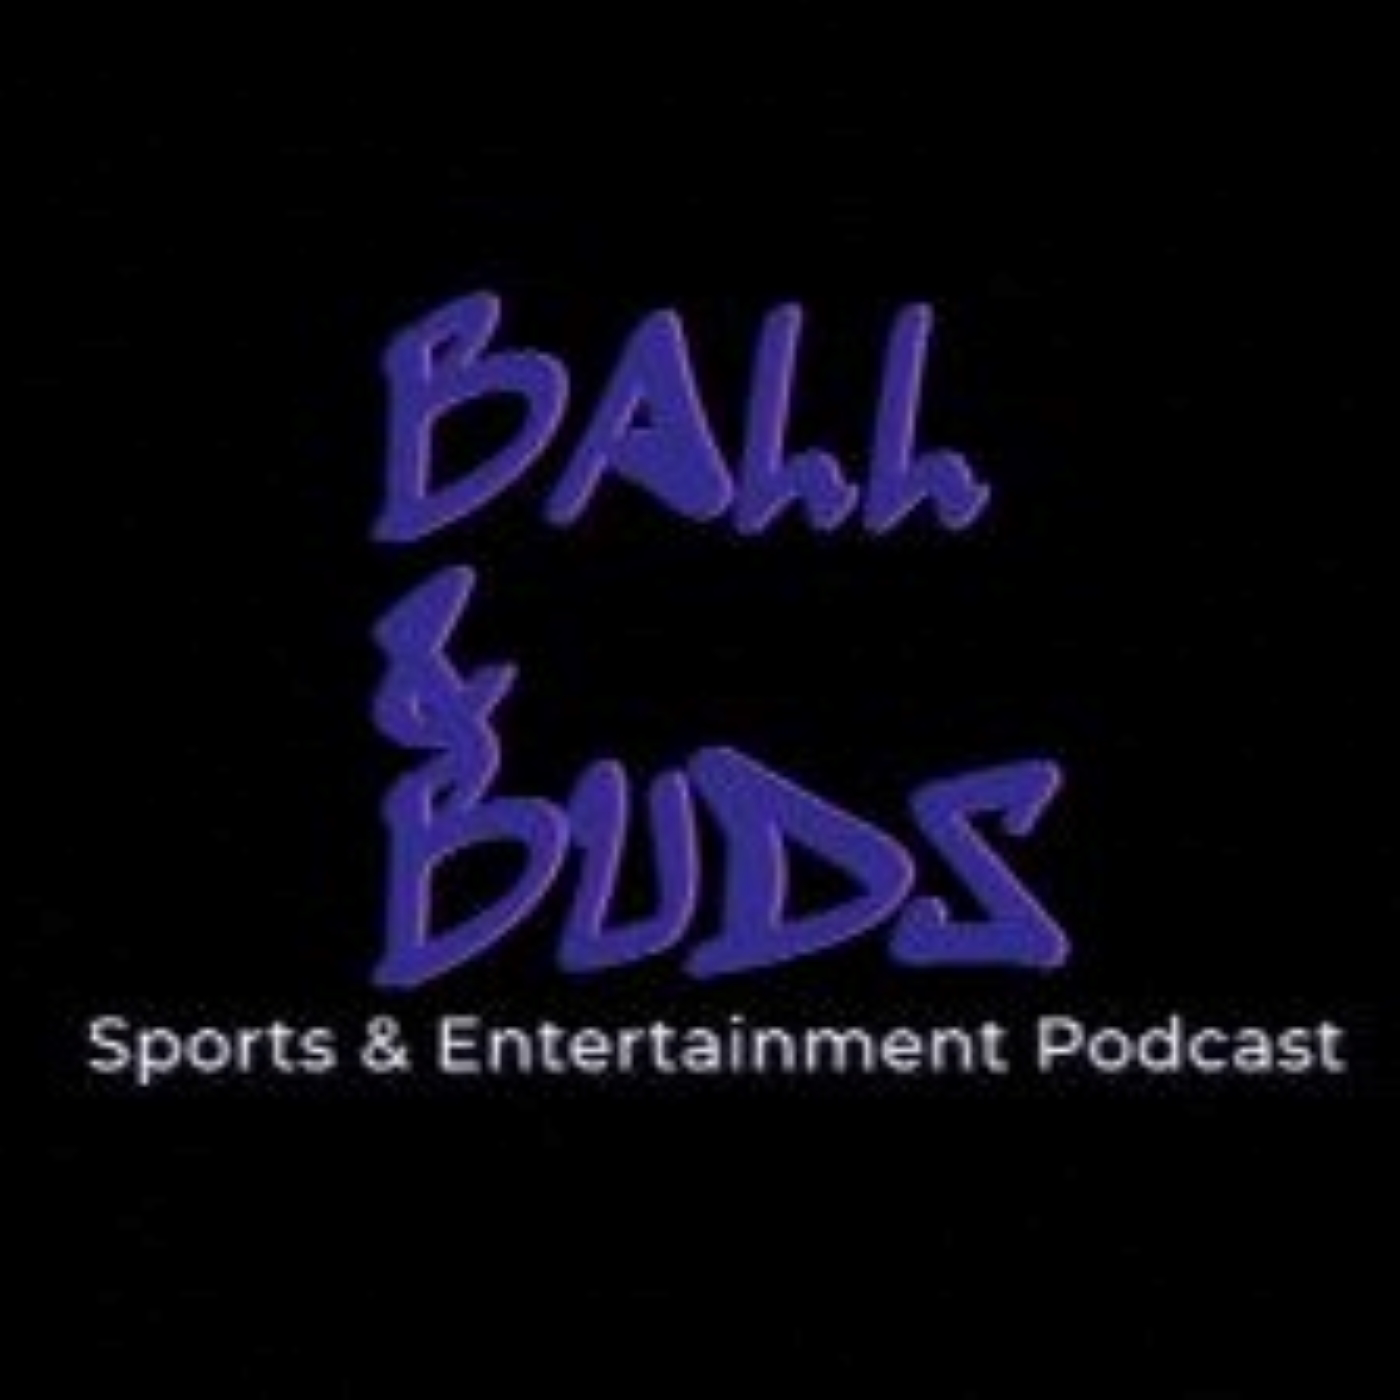 A highlight from 'New & Old School Wrasslin' ft. 'Keepin' it 100' Podcast Crew & Pro Wrestling Insider Greg Lawson (Ball & Buds Podcast Episode #25)